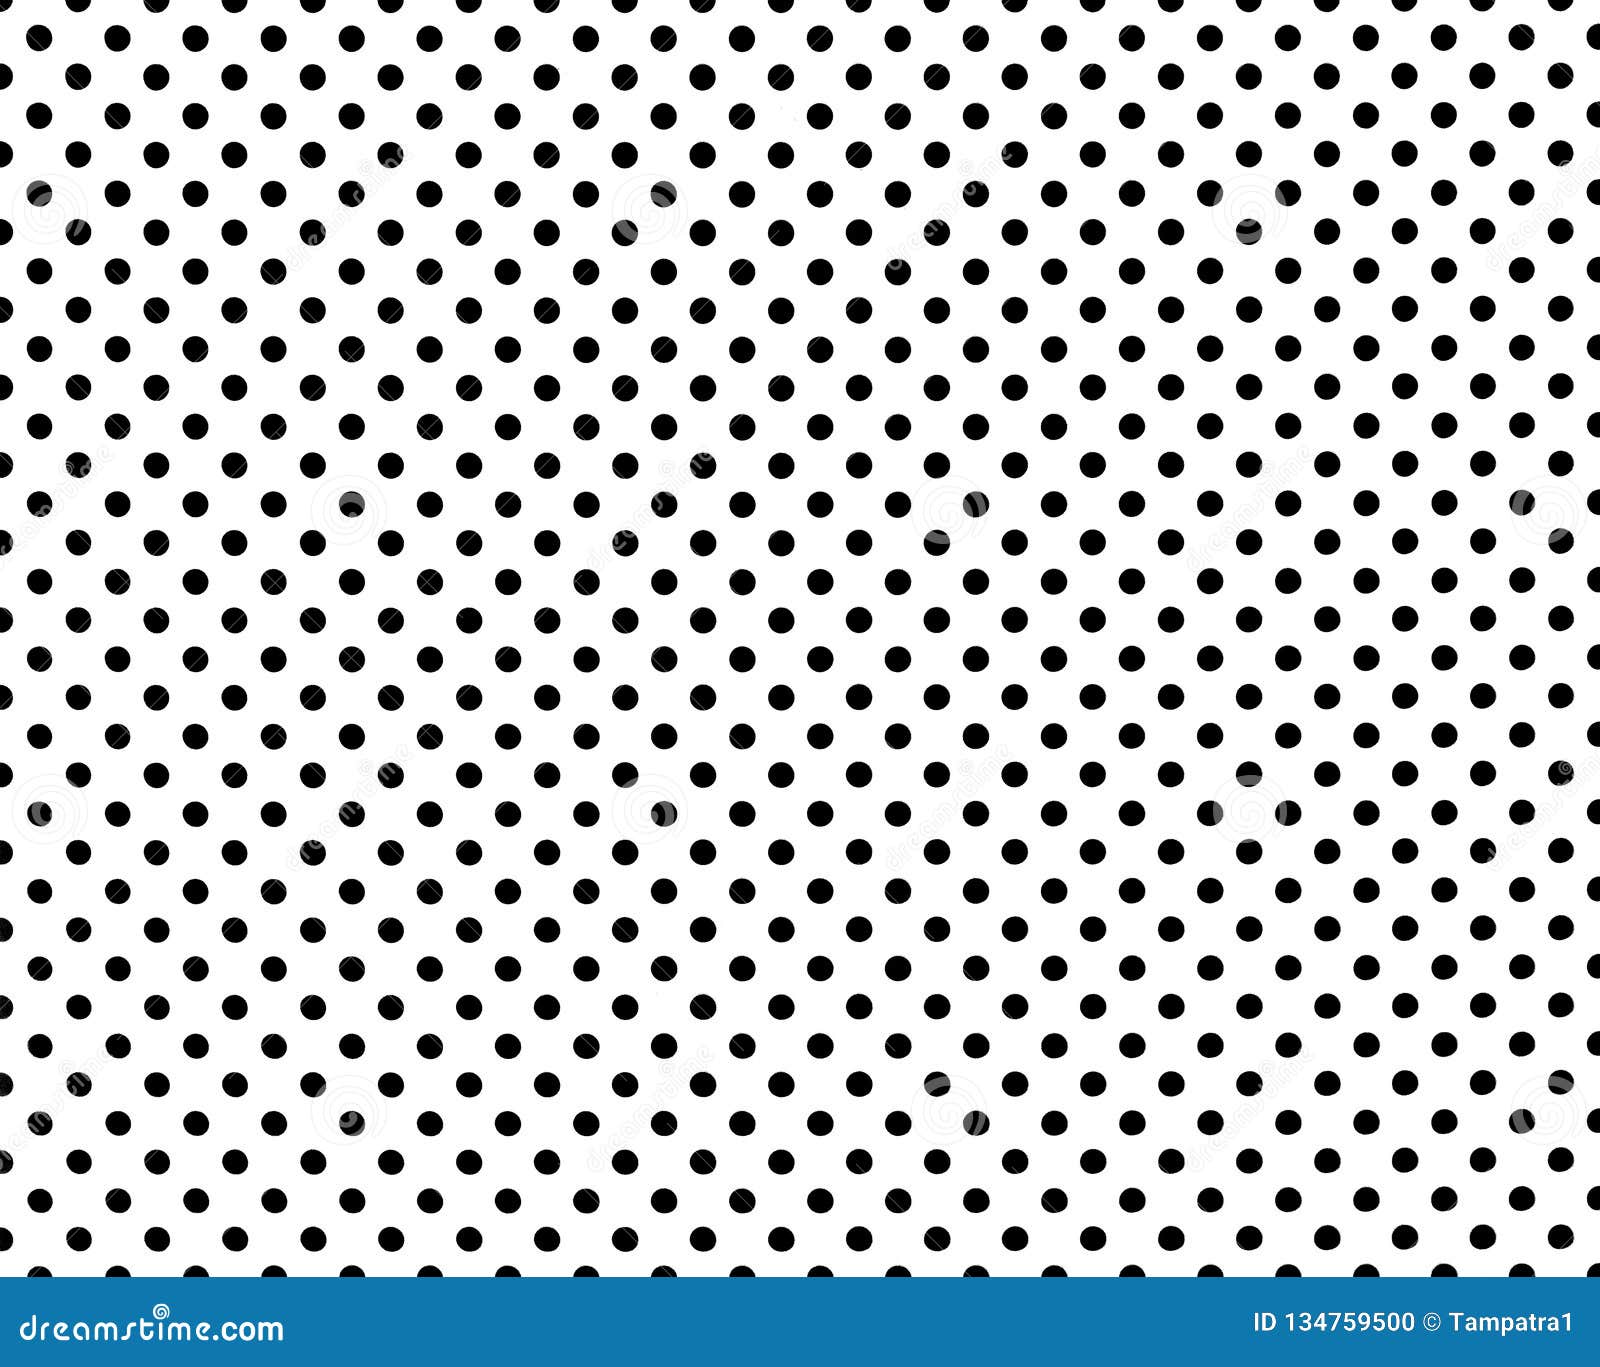 Perforated Holes. Seamless Metal Grille. Wire Fence Isolated on Black ...